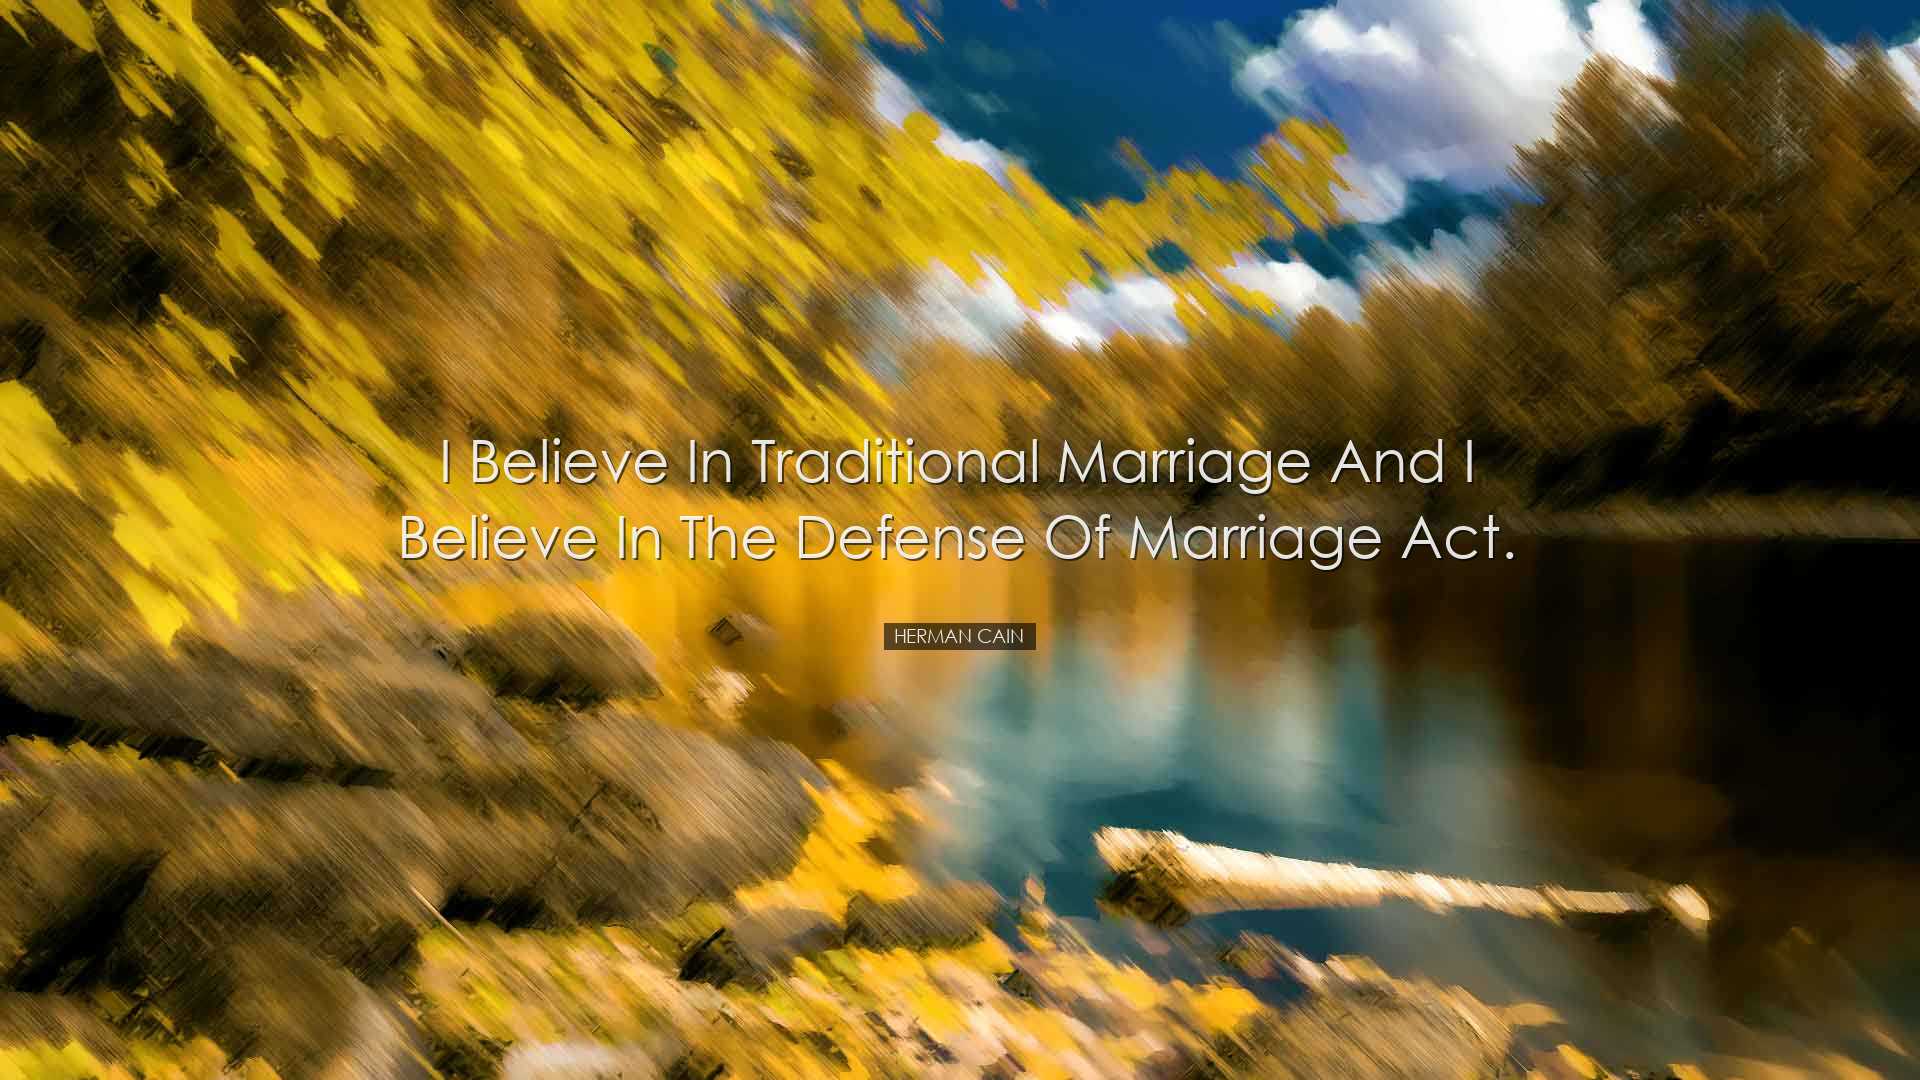 I believe in traditional marriage and I believe in the Defense of